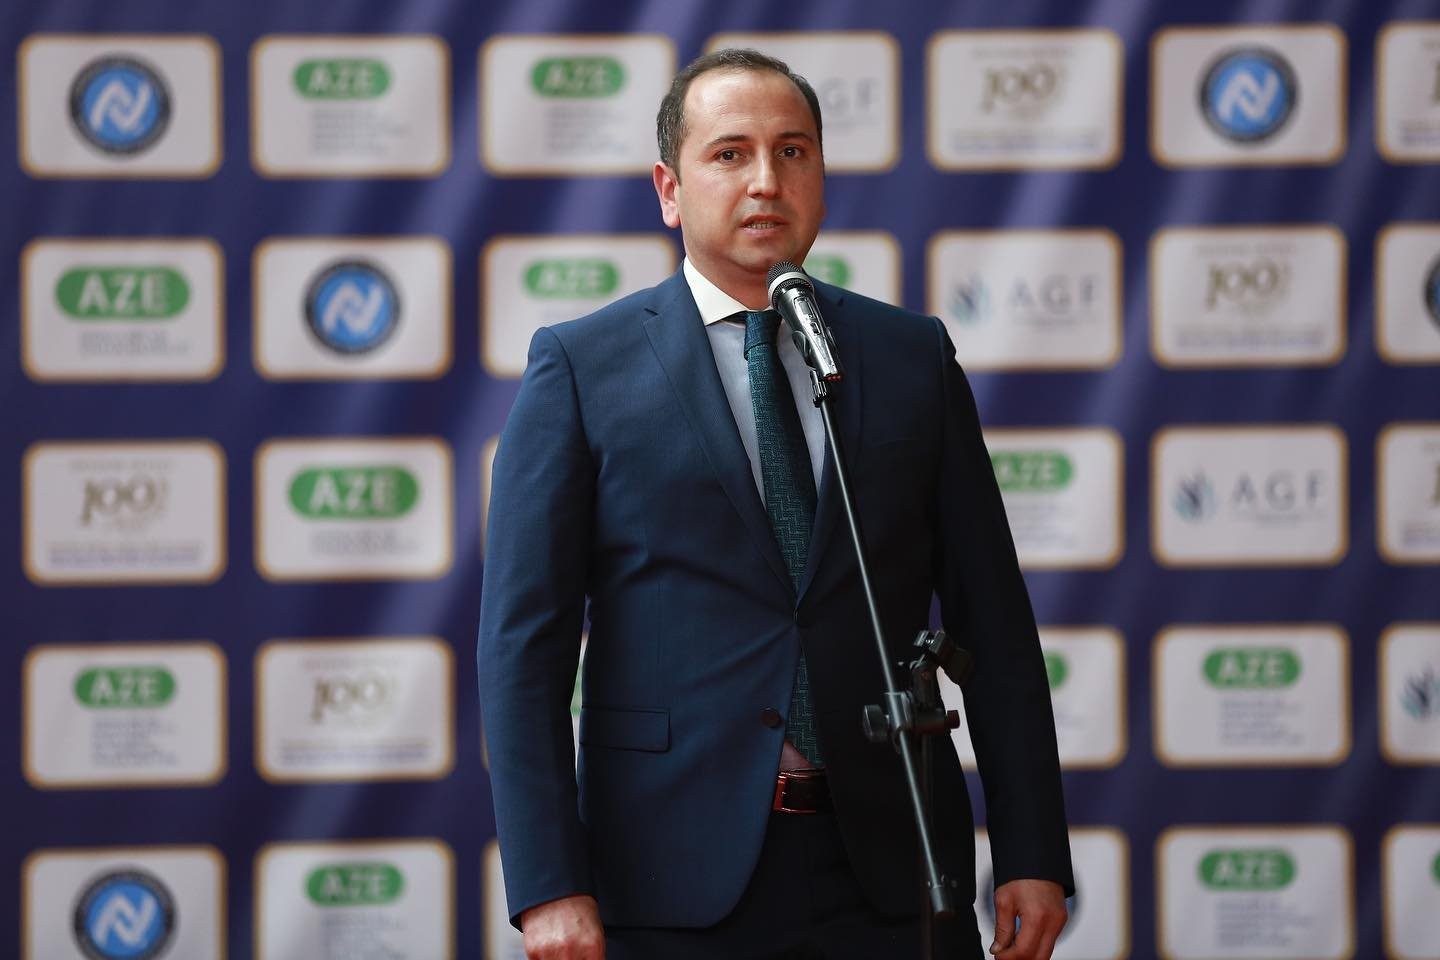 The Open Judo Championship dedicated to the "Year of Heydar Aliyev" has been concluded - PHOTO